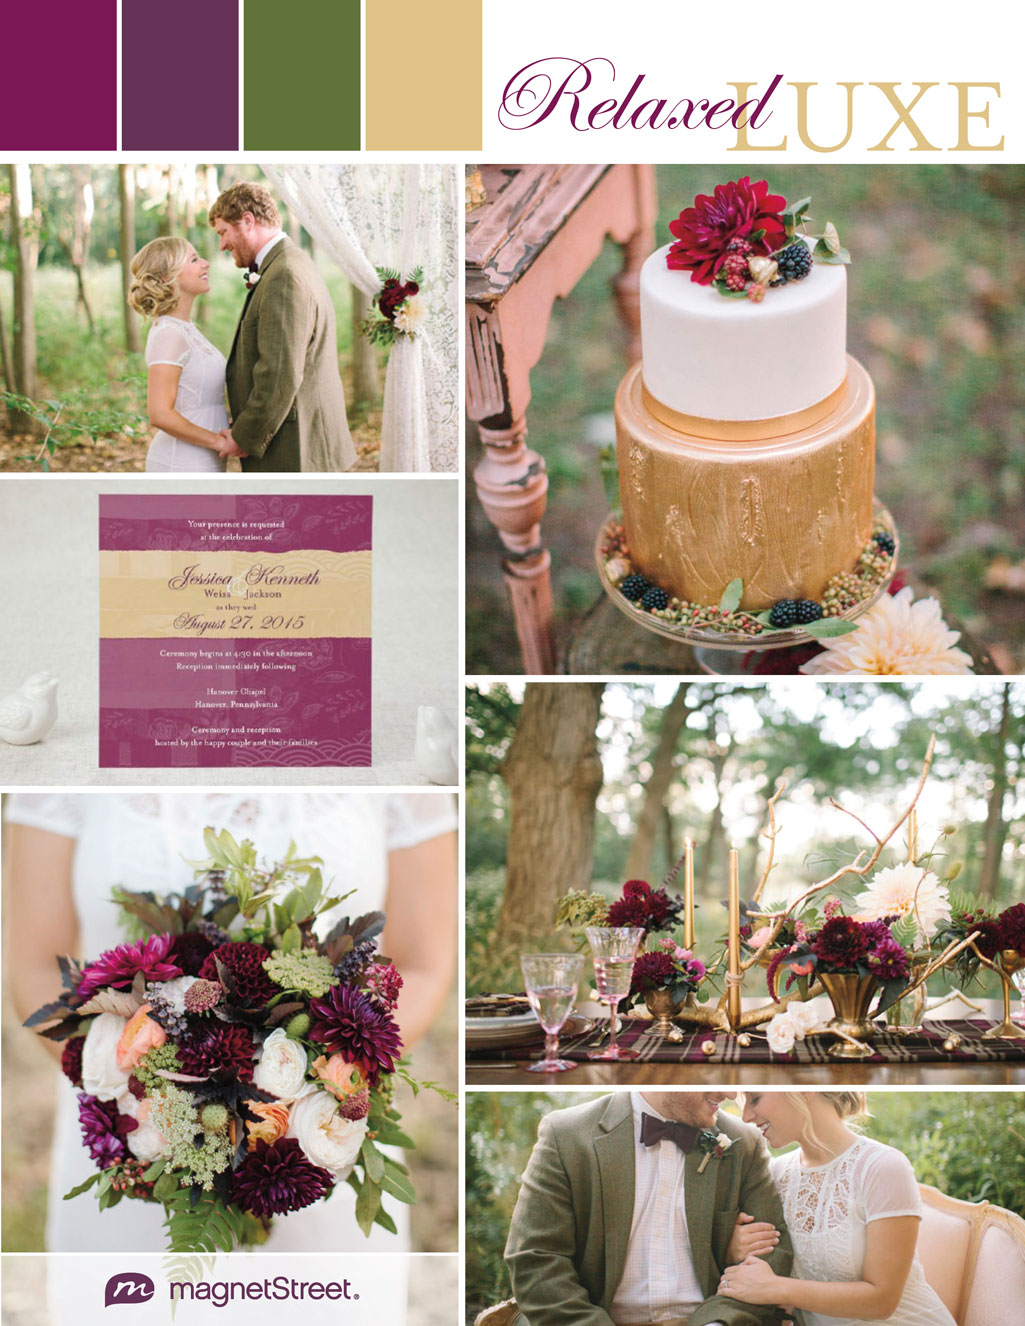 Regal and rustic wedding ideas in purple, green and gold from MagnetStreet